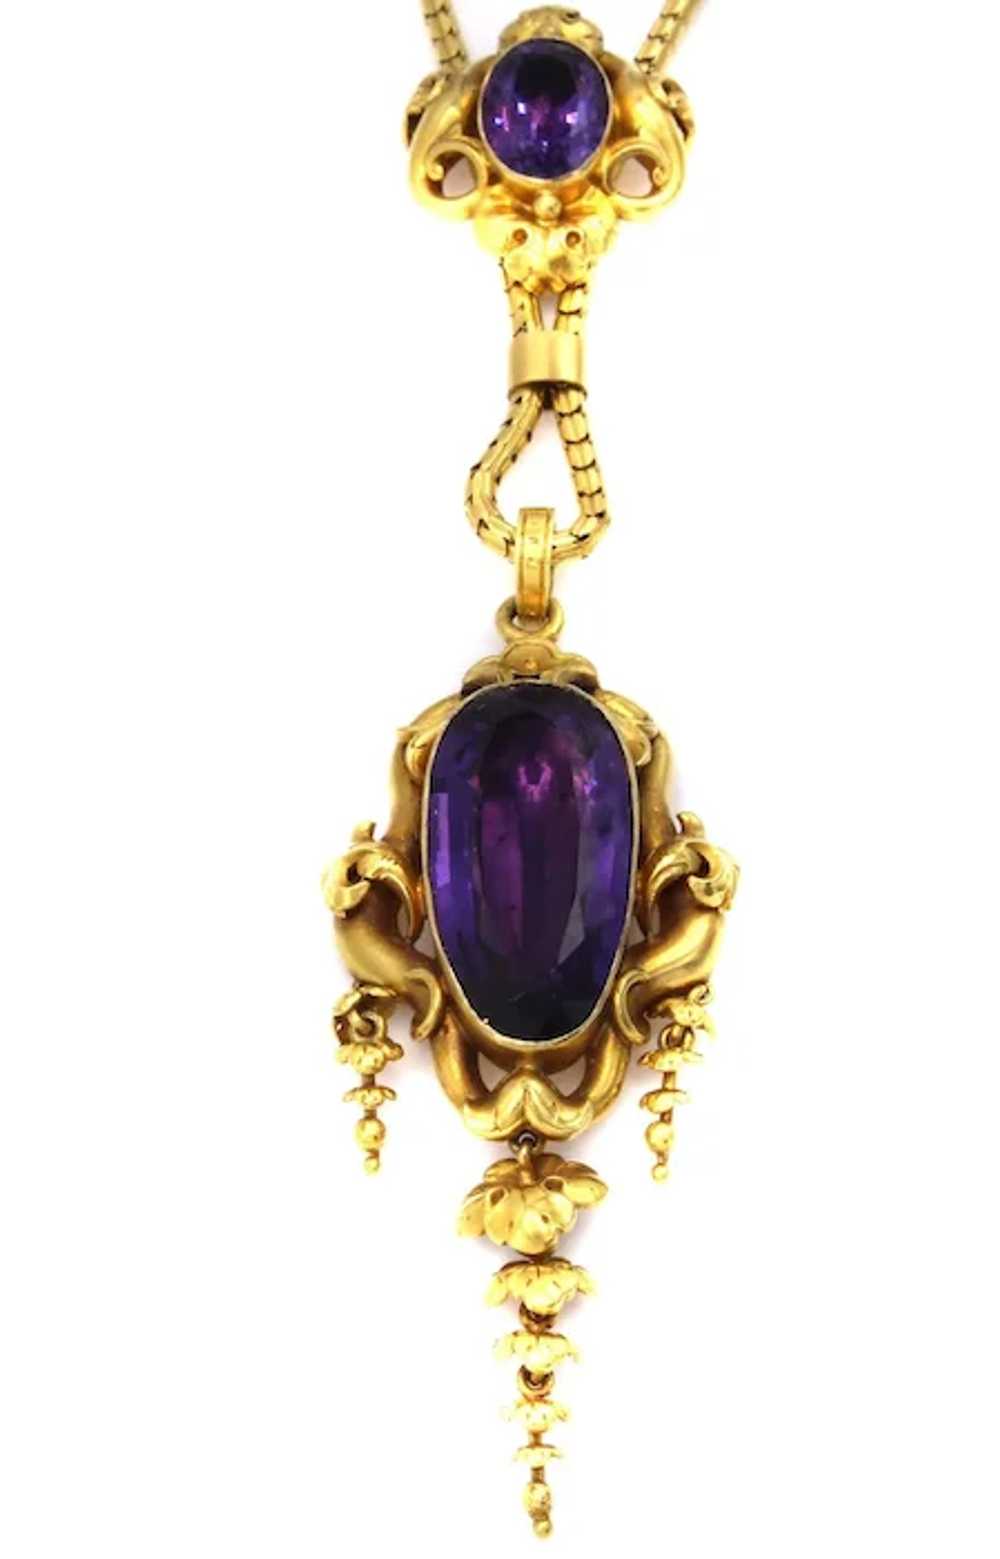 Victorian Amethyst Gold Pendant Necklace - image 2